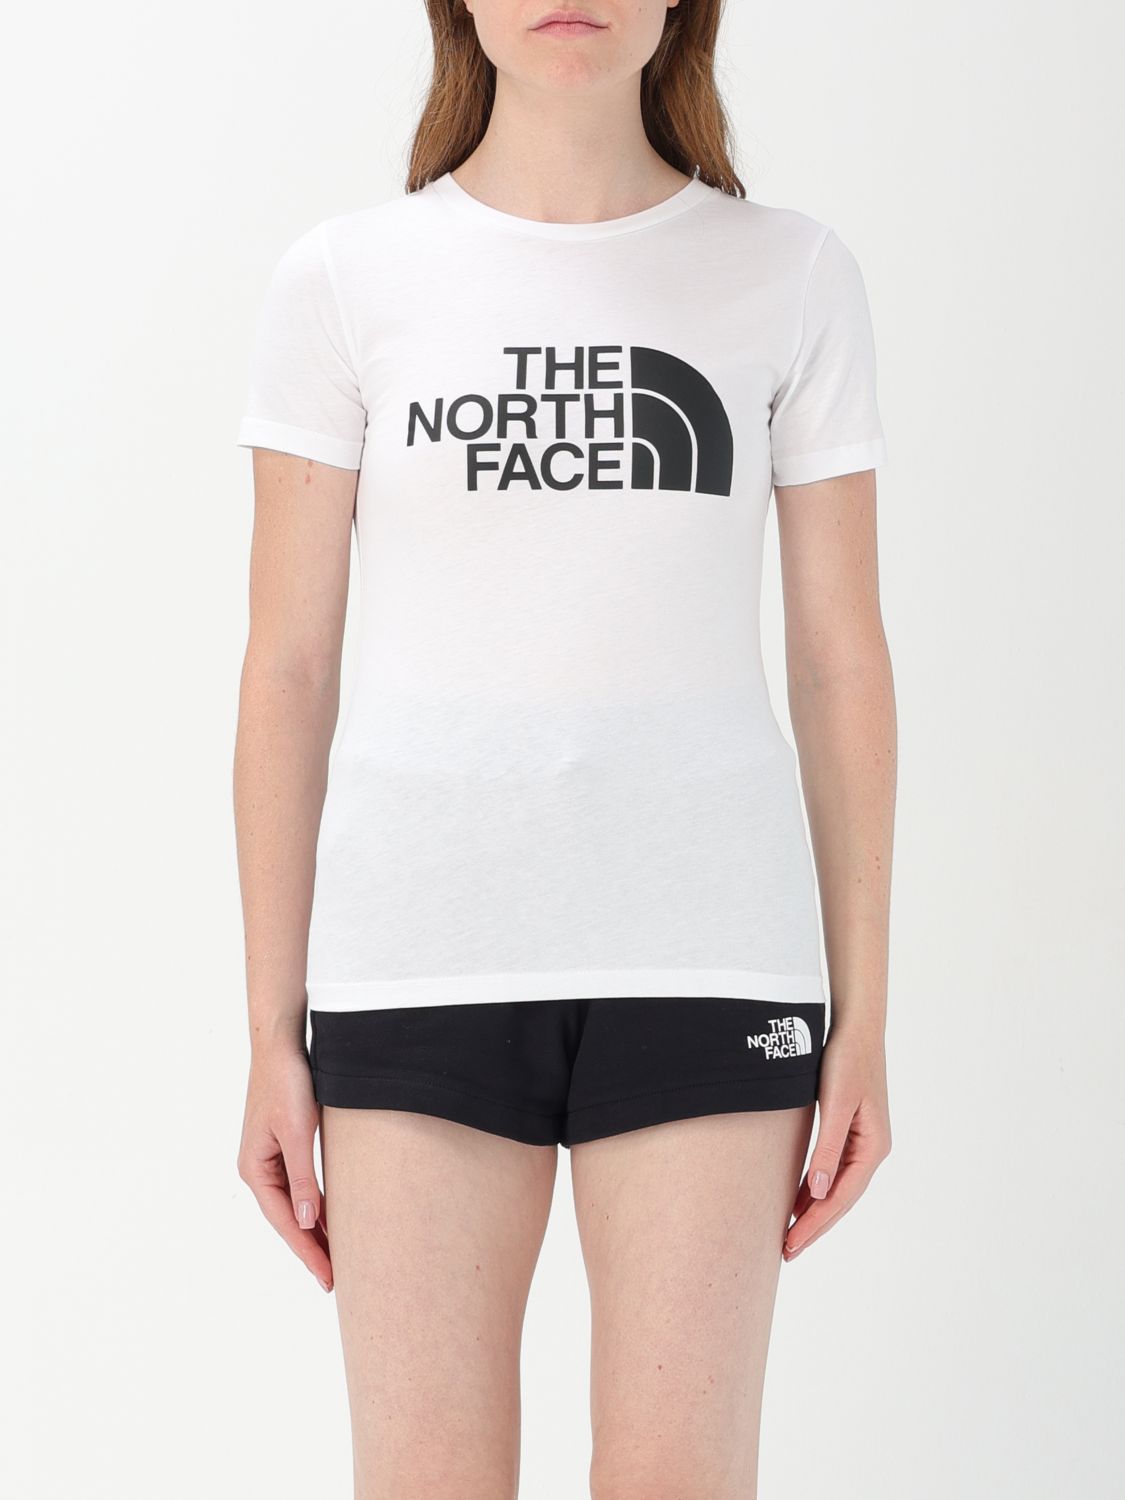 The North Face T-Shirt THE NORTH FACE Woman color White